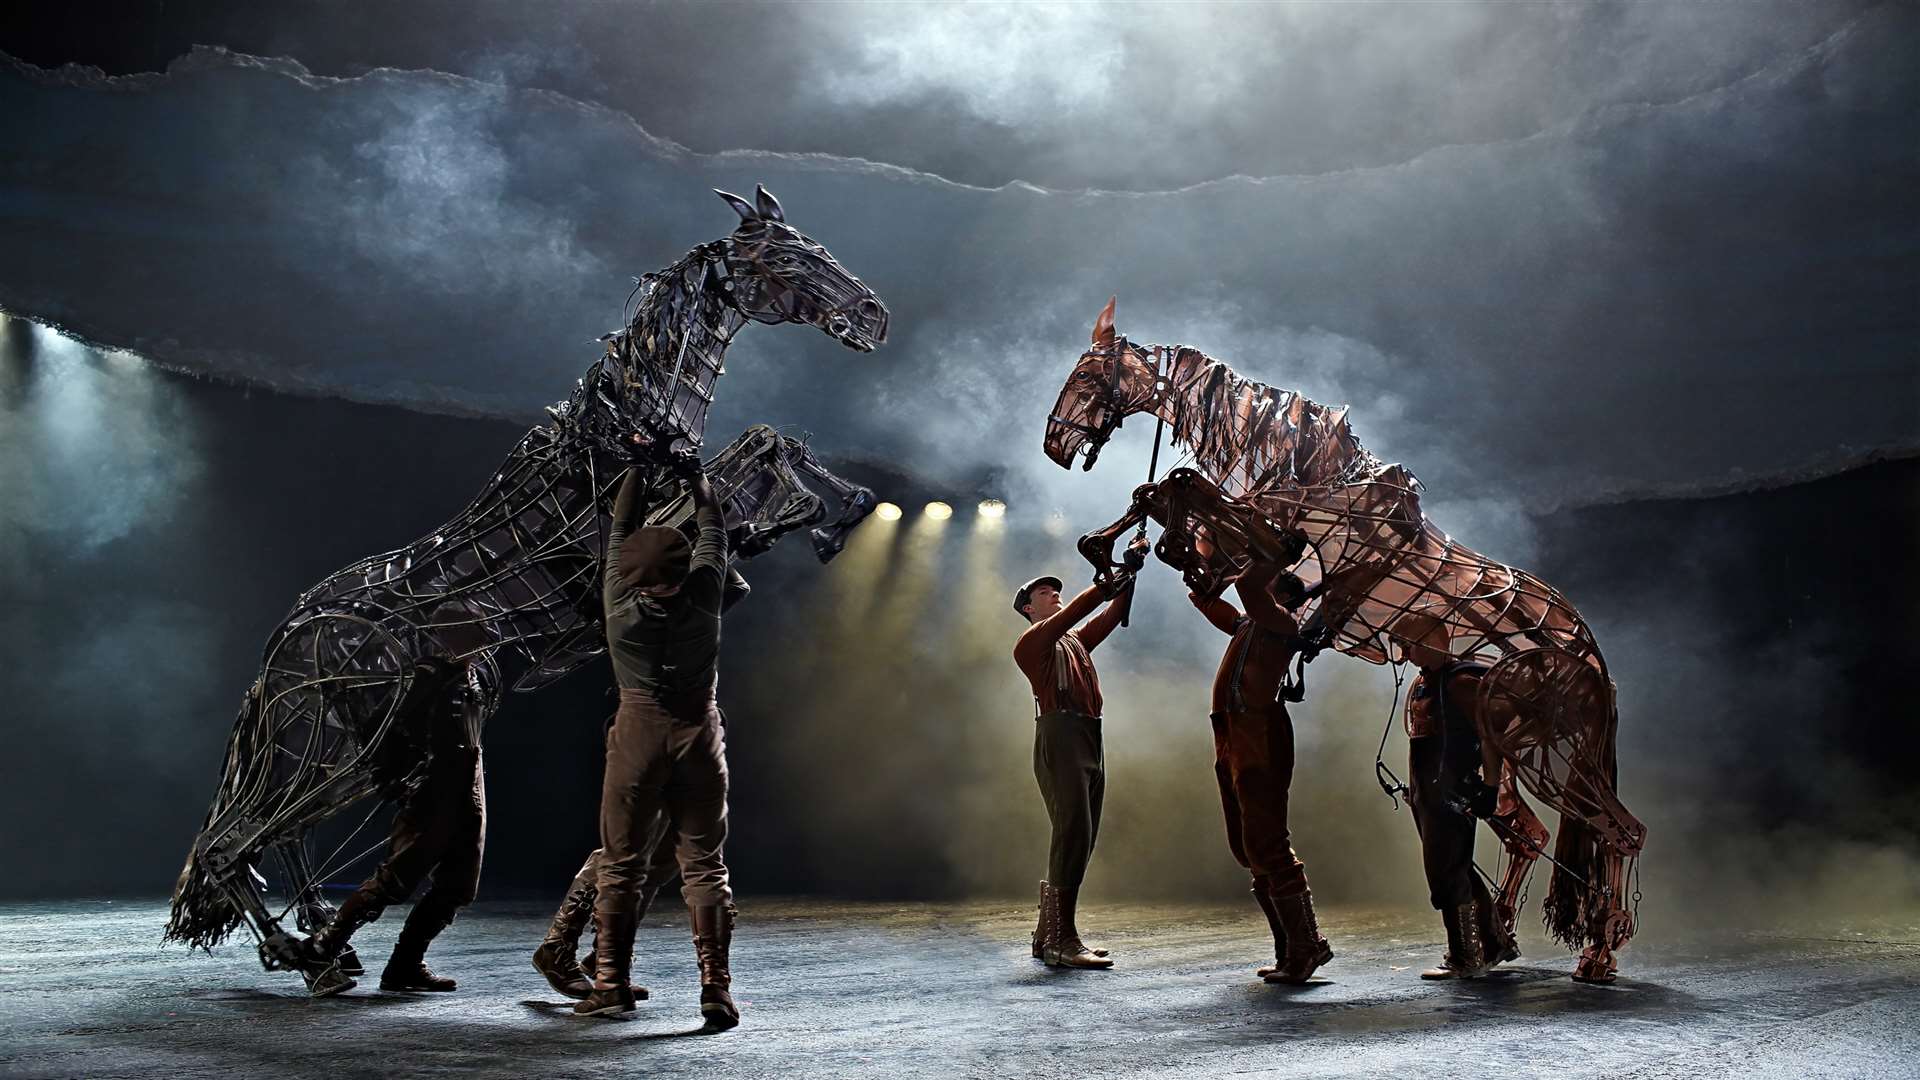 The National Theatre's War Horse is at the Marlowe for its 10th anniversary